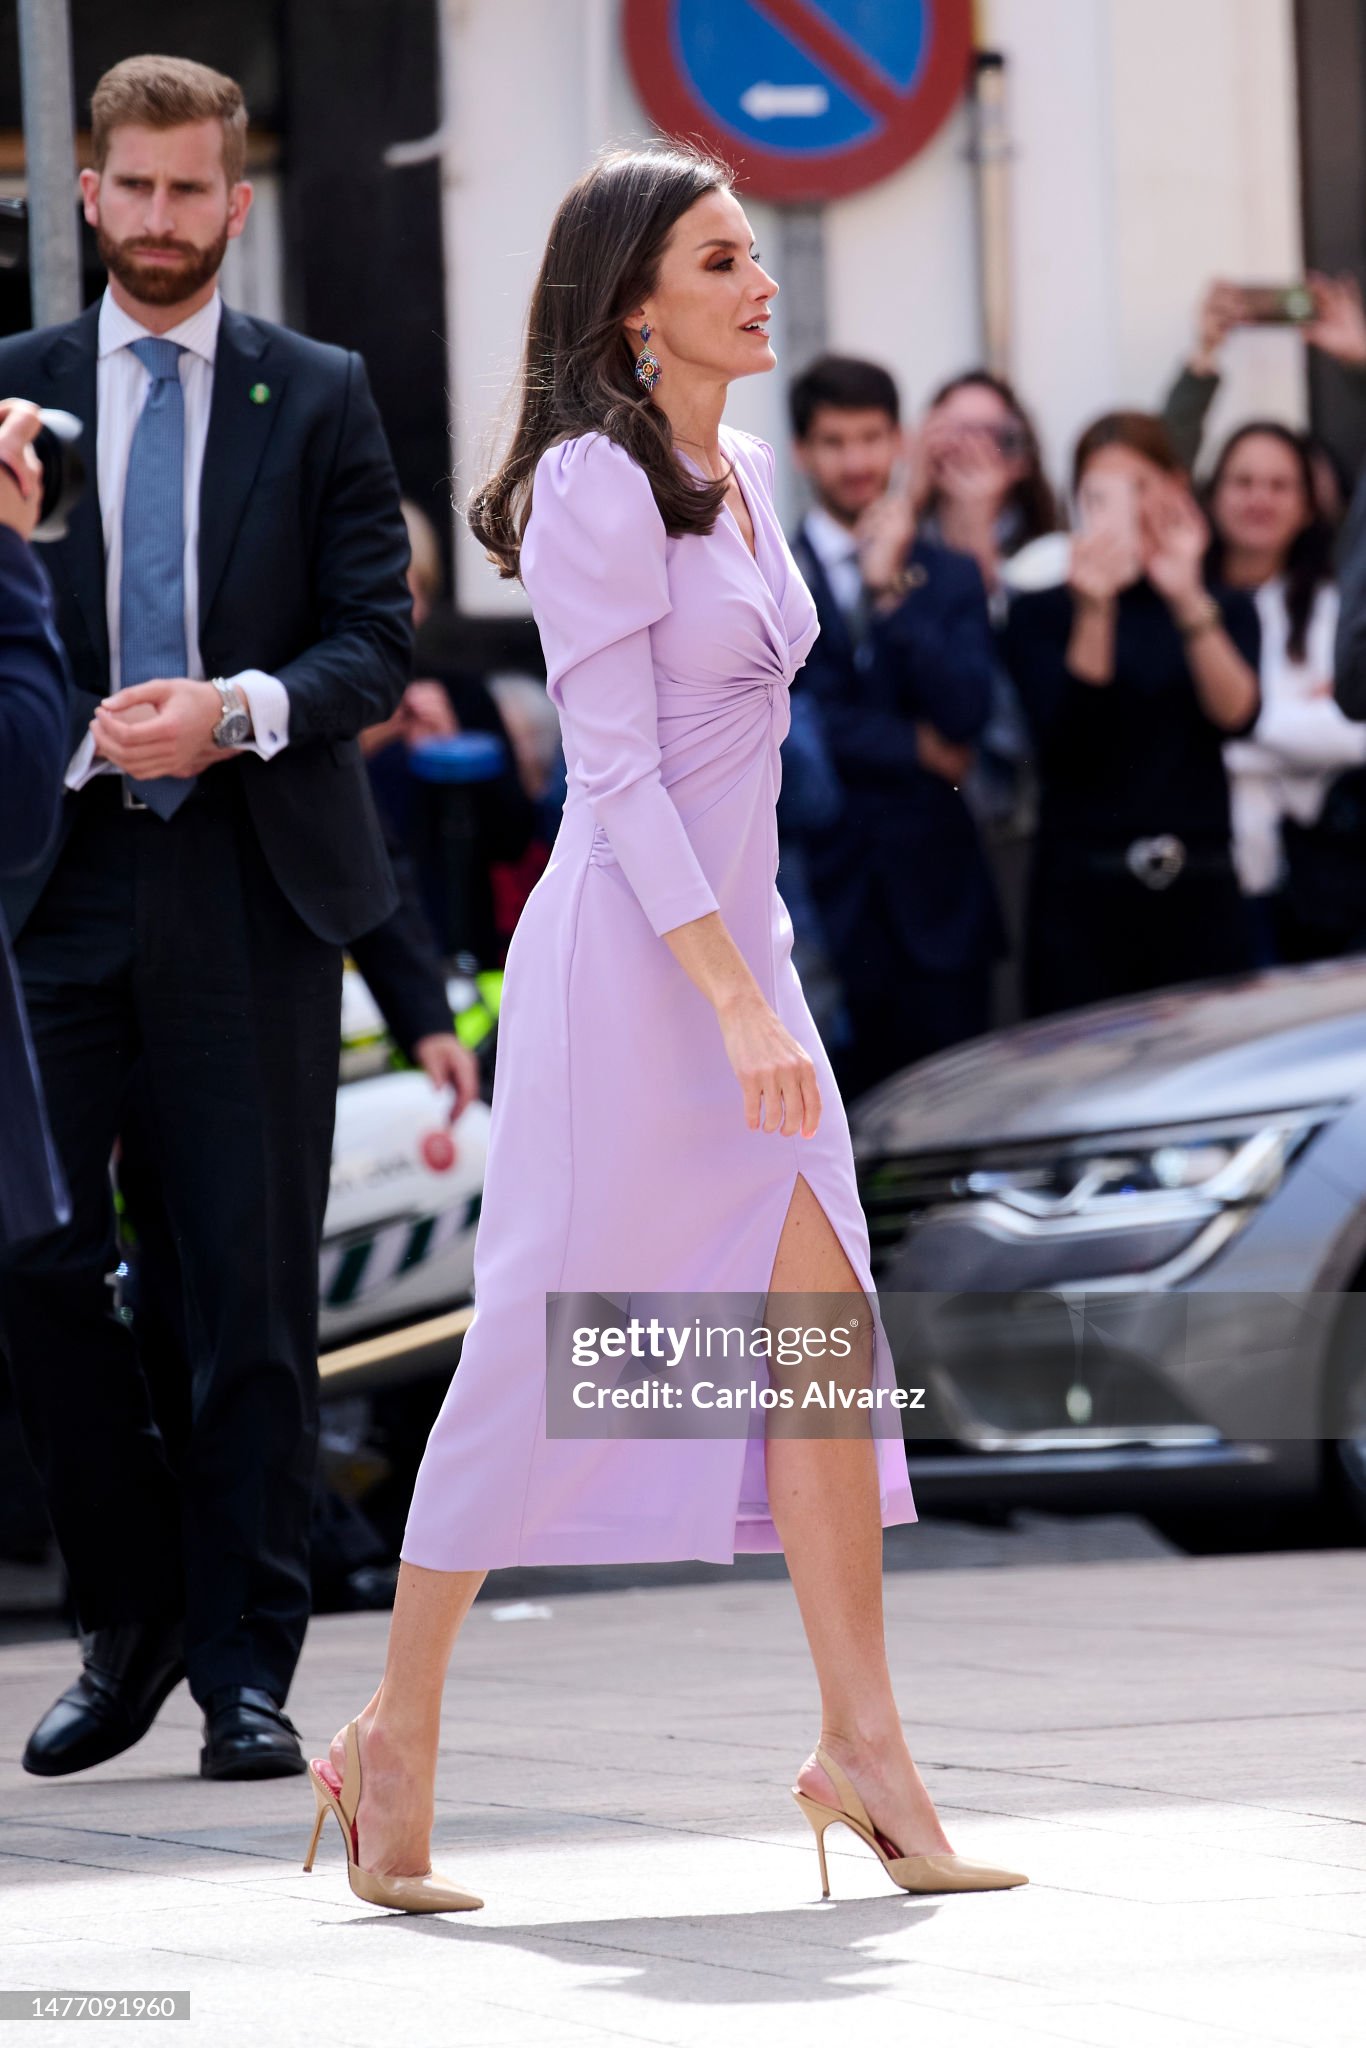 queen-letizia-of-spain-attends-the-ix-international-congress-of-the-spanish-language-at-the.jpg